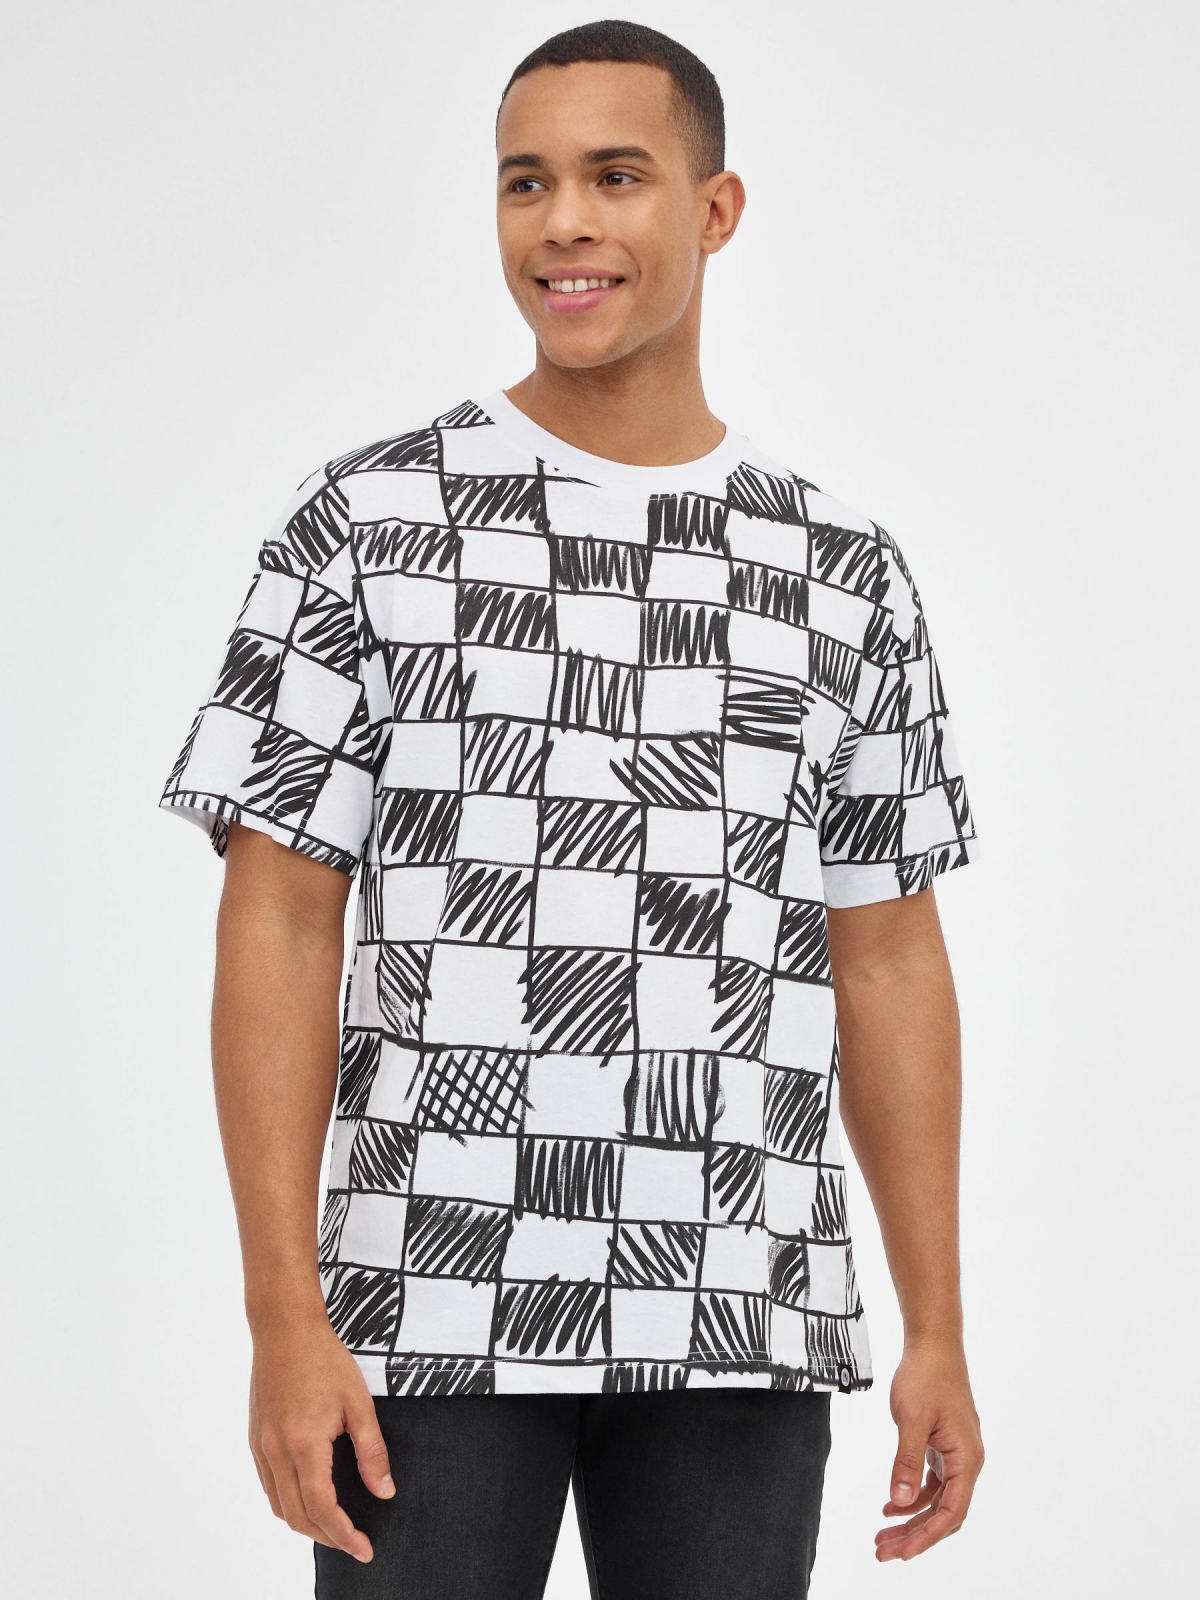 Black and white checkered t-shirt black middle front view